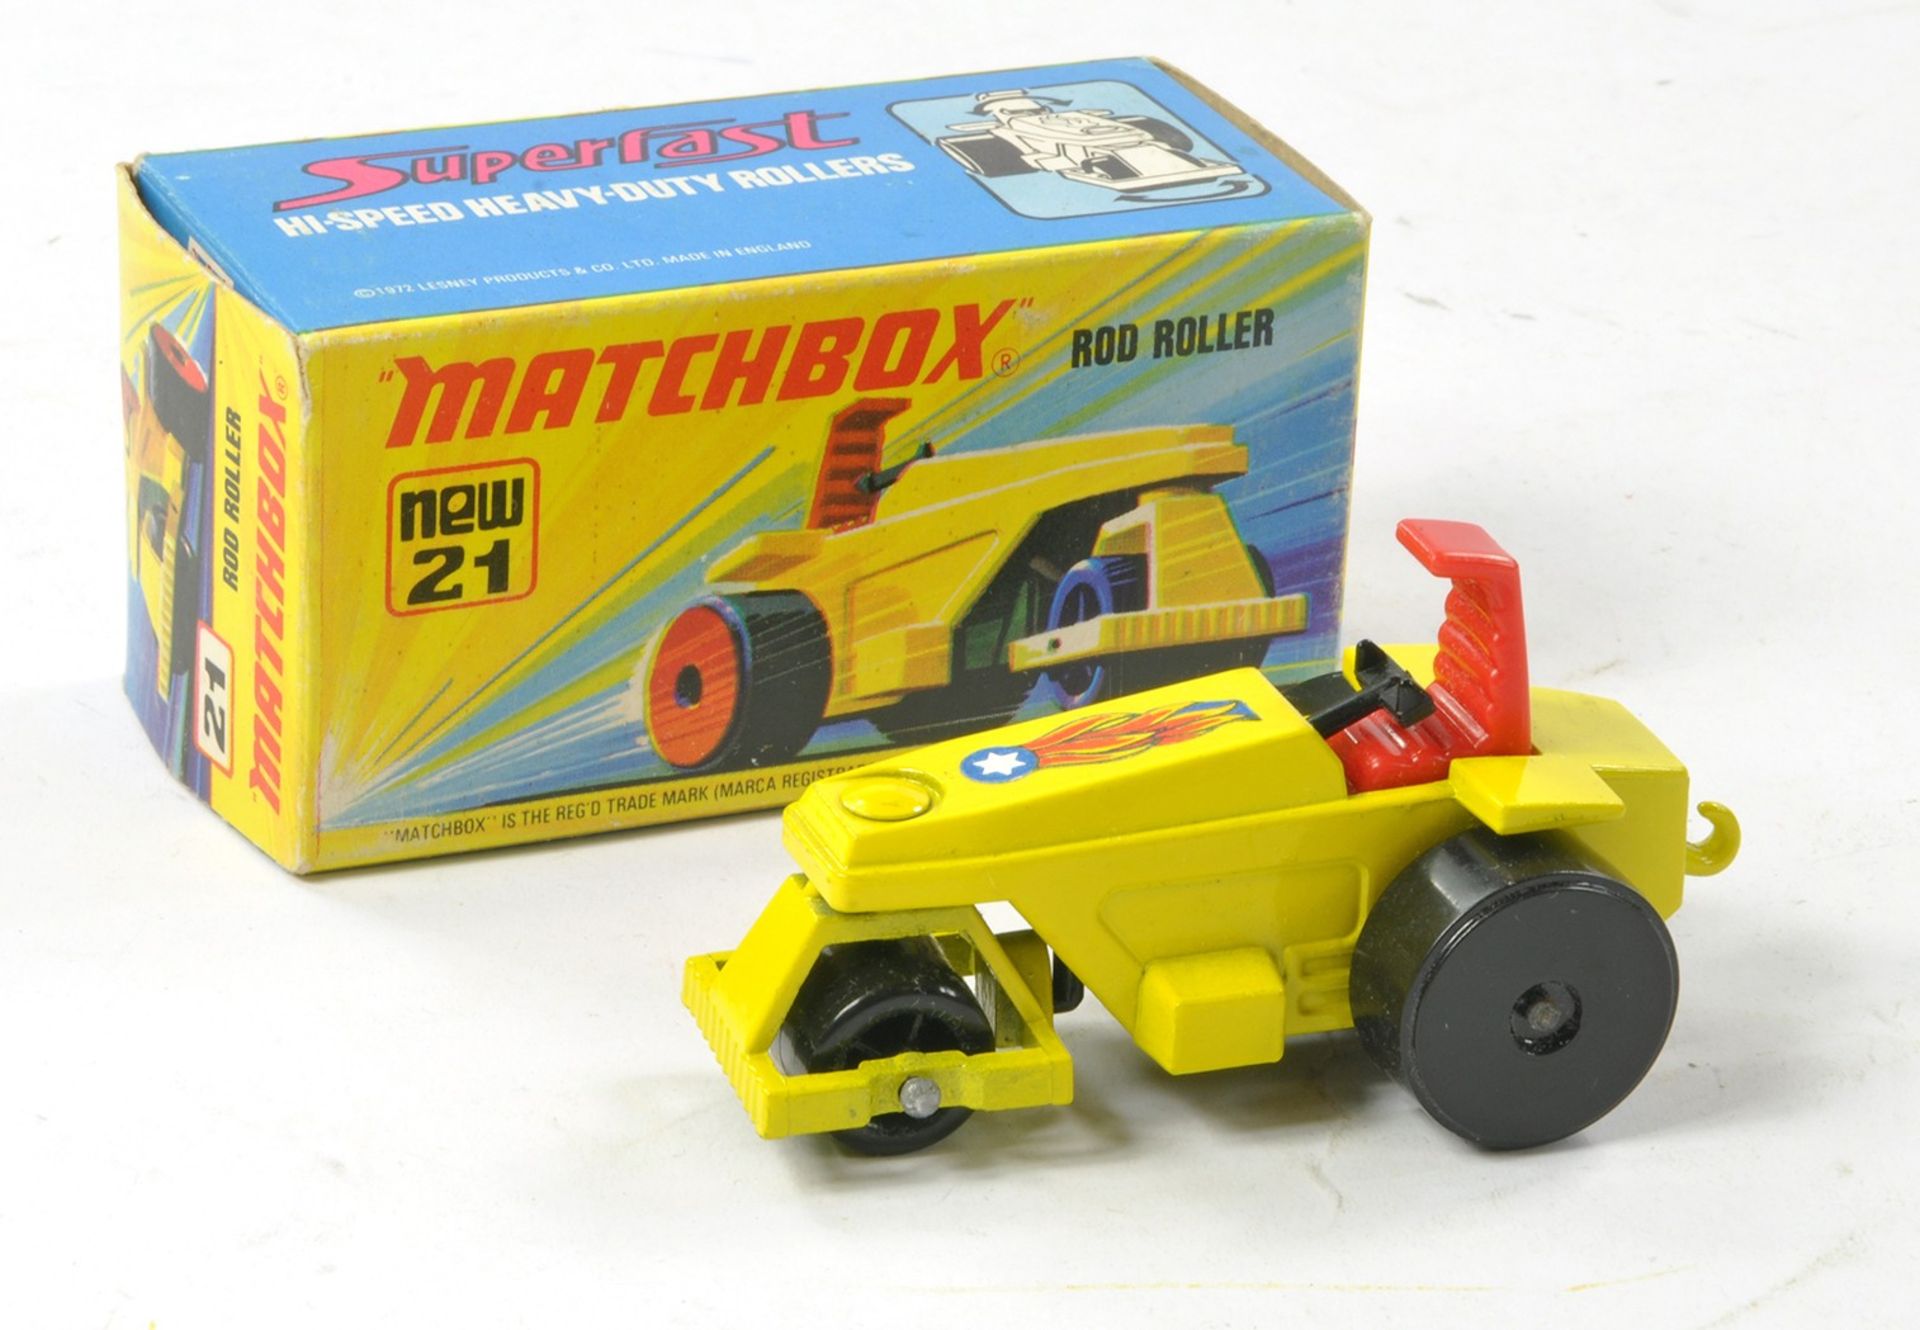 Matchbox Superfast No. 21b Rod Roller. Lemon yellow body with flame label, red seat, harder to